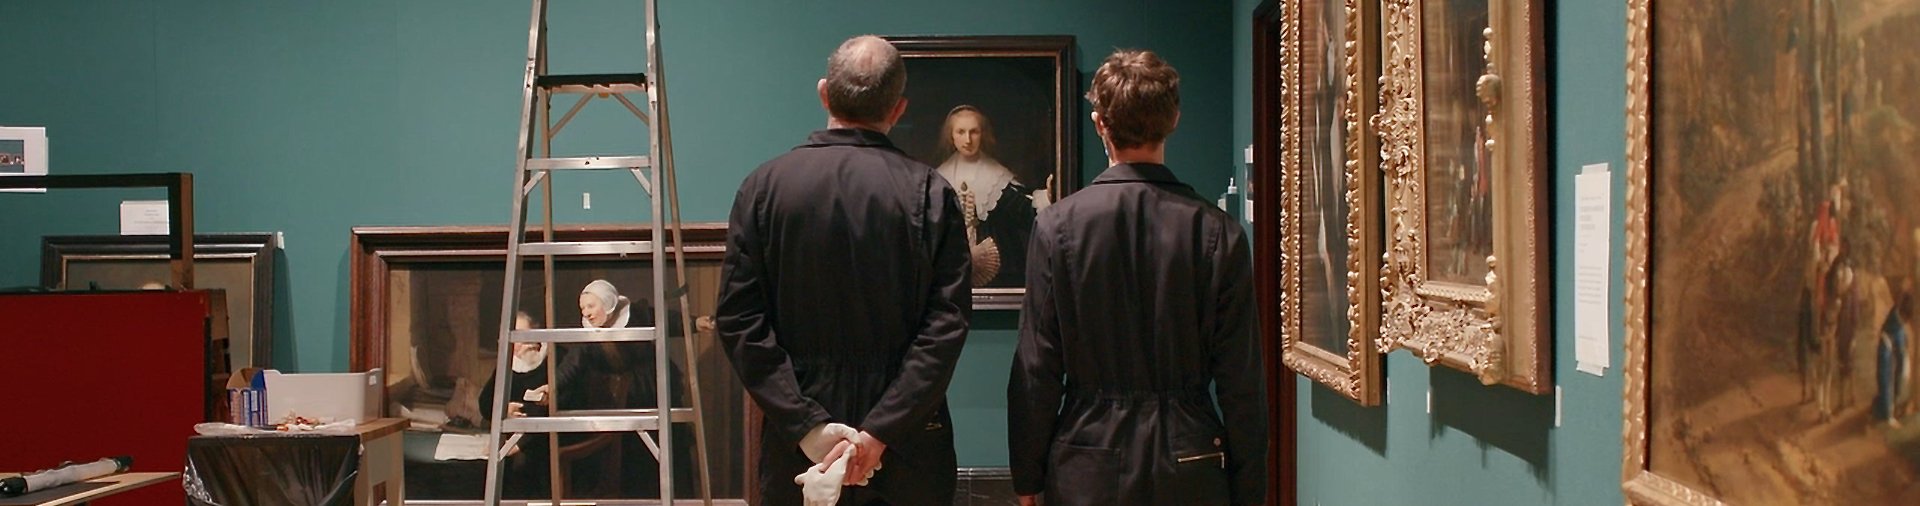 Still from Masterpieces from Buckingham Palace  for Sky Arts Inside Art